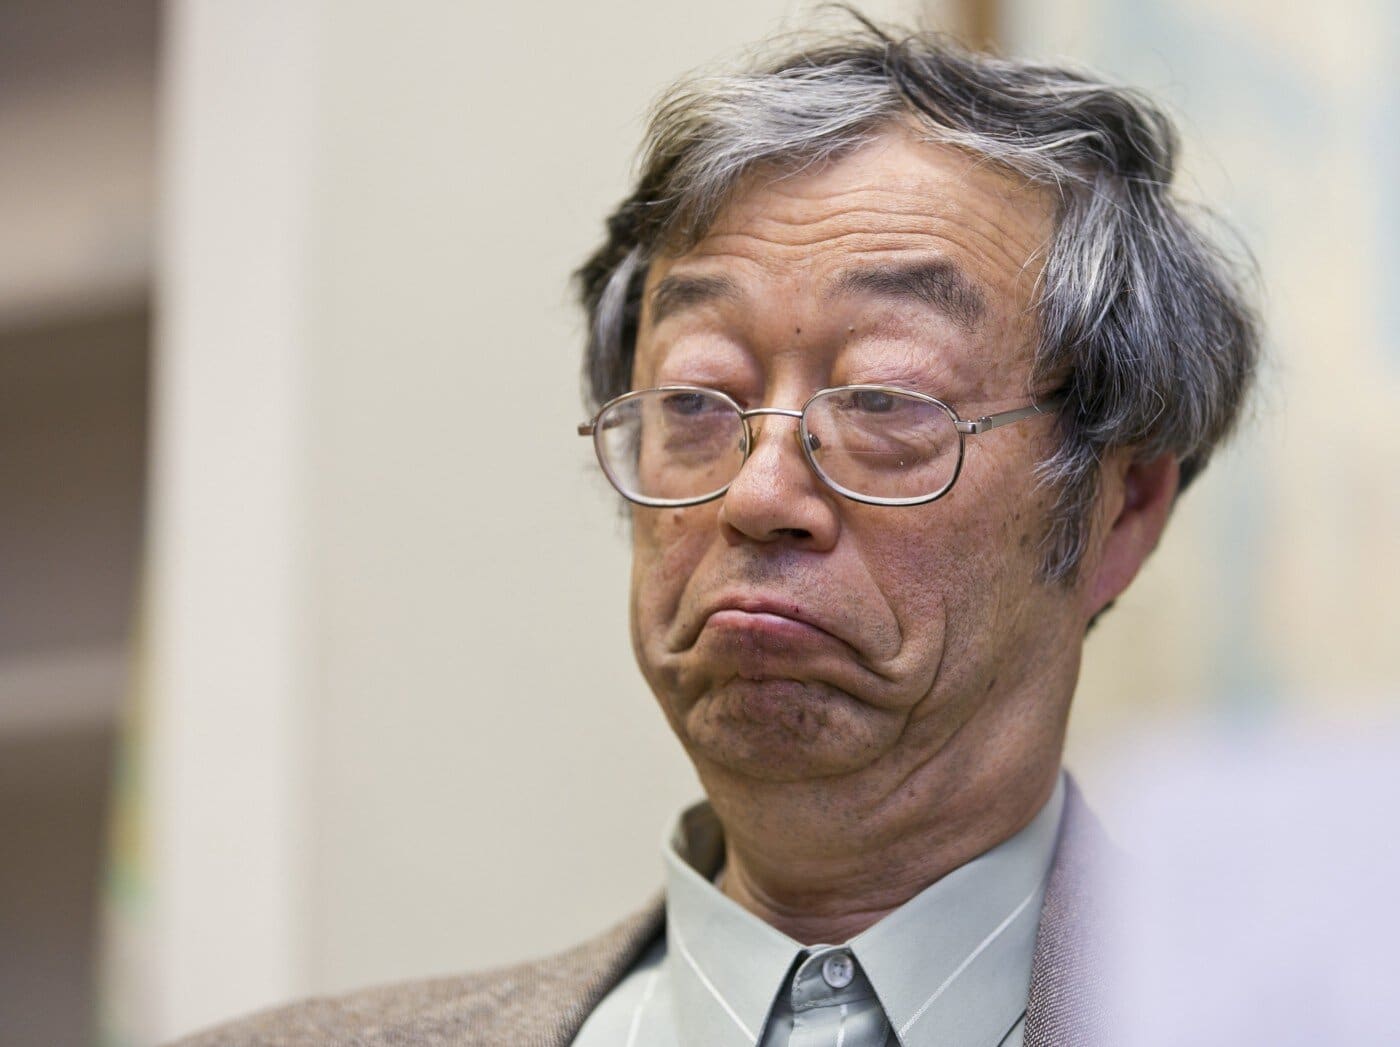 Even Jap Satoshi was more shocked at Faketoshi’s claims than the reporter’s claim it was him..